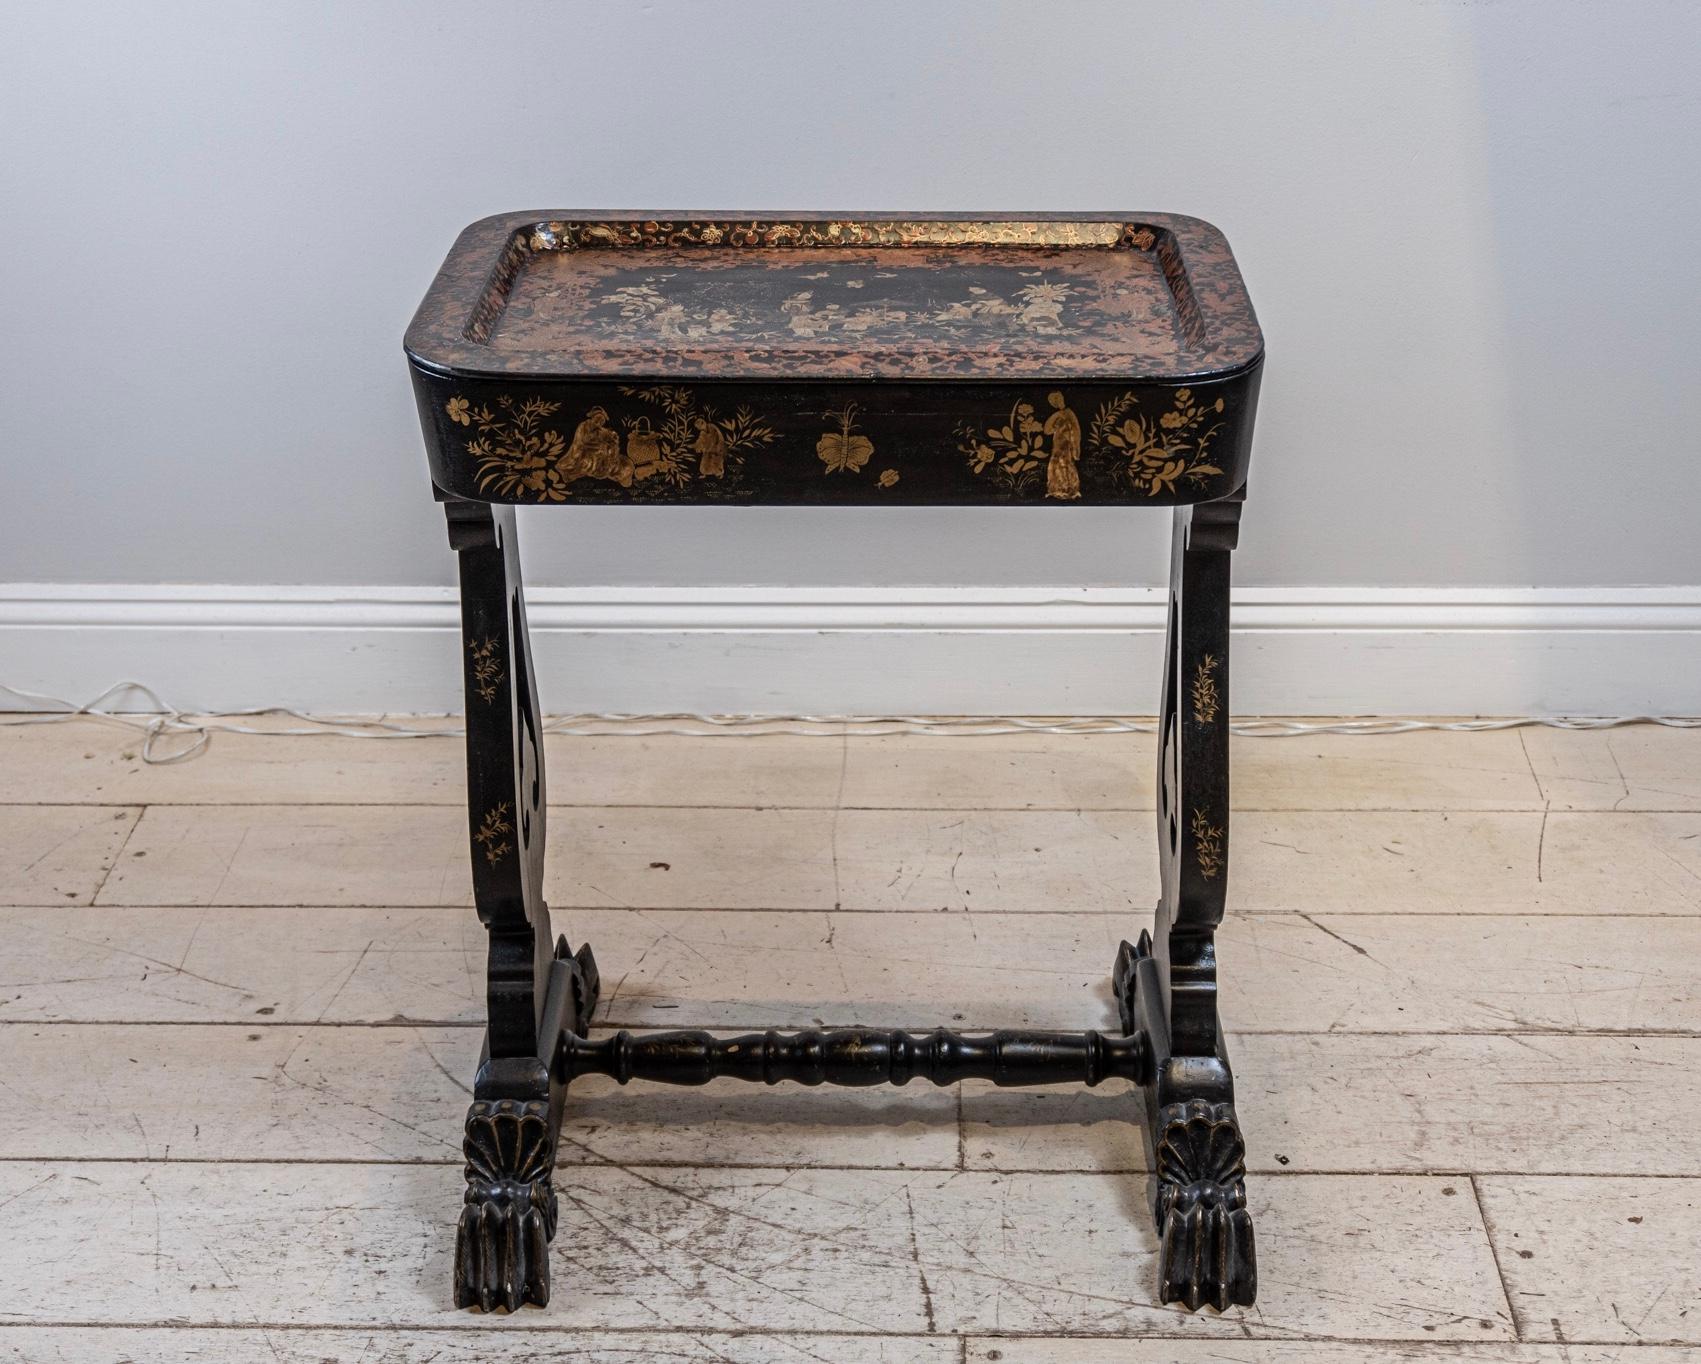 Late 19th century lacquered chinoiserie decorated side/tray table. Most likely to be French and converted from a sewing table at some point over the years.

The decoration which is over the body and lyre shaped sides is of female figures, flowers,